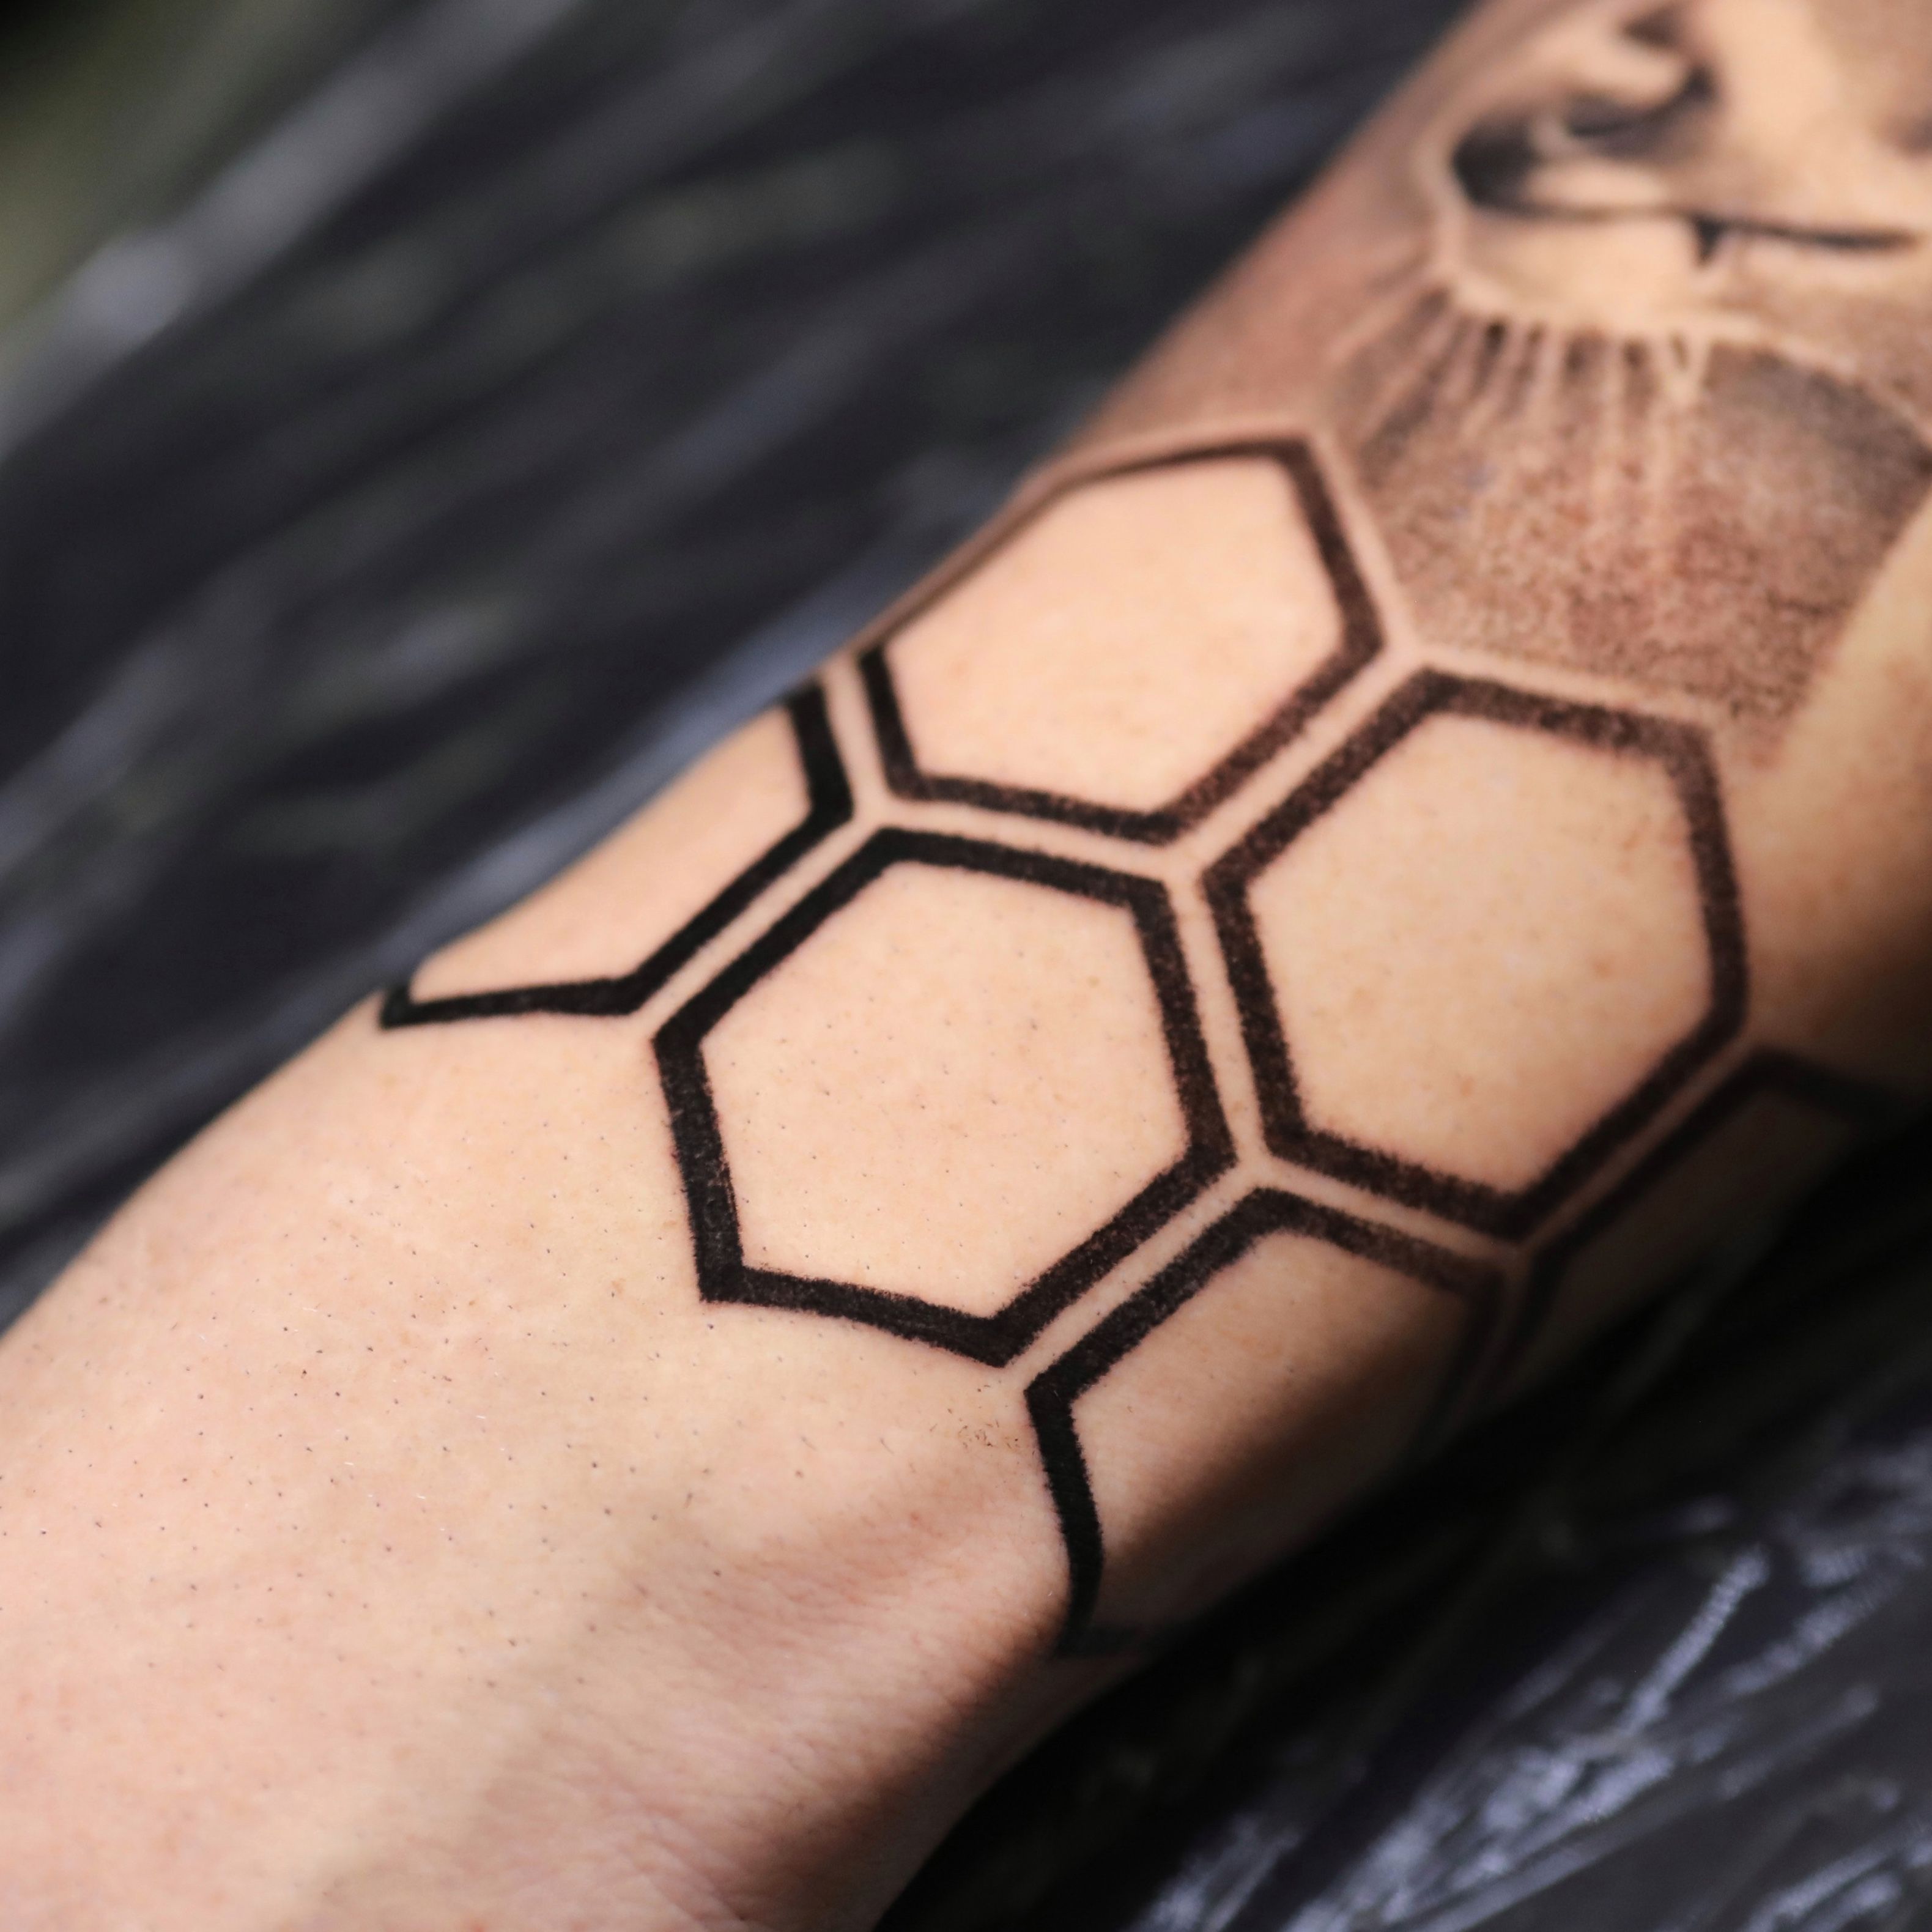 Bees and honeycomb filler in a slice of space between existing tattoos   Instagram